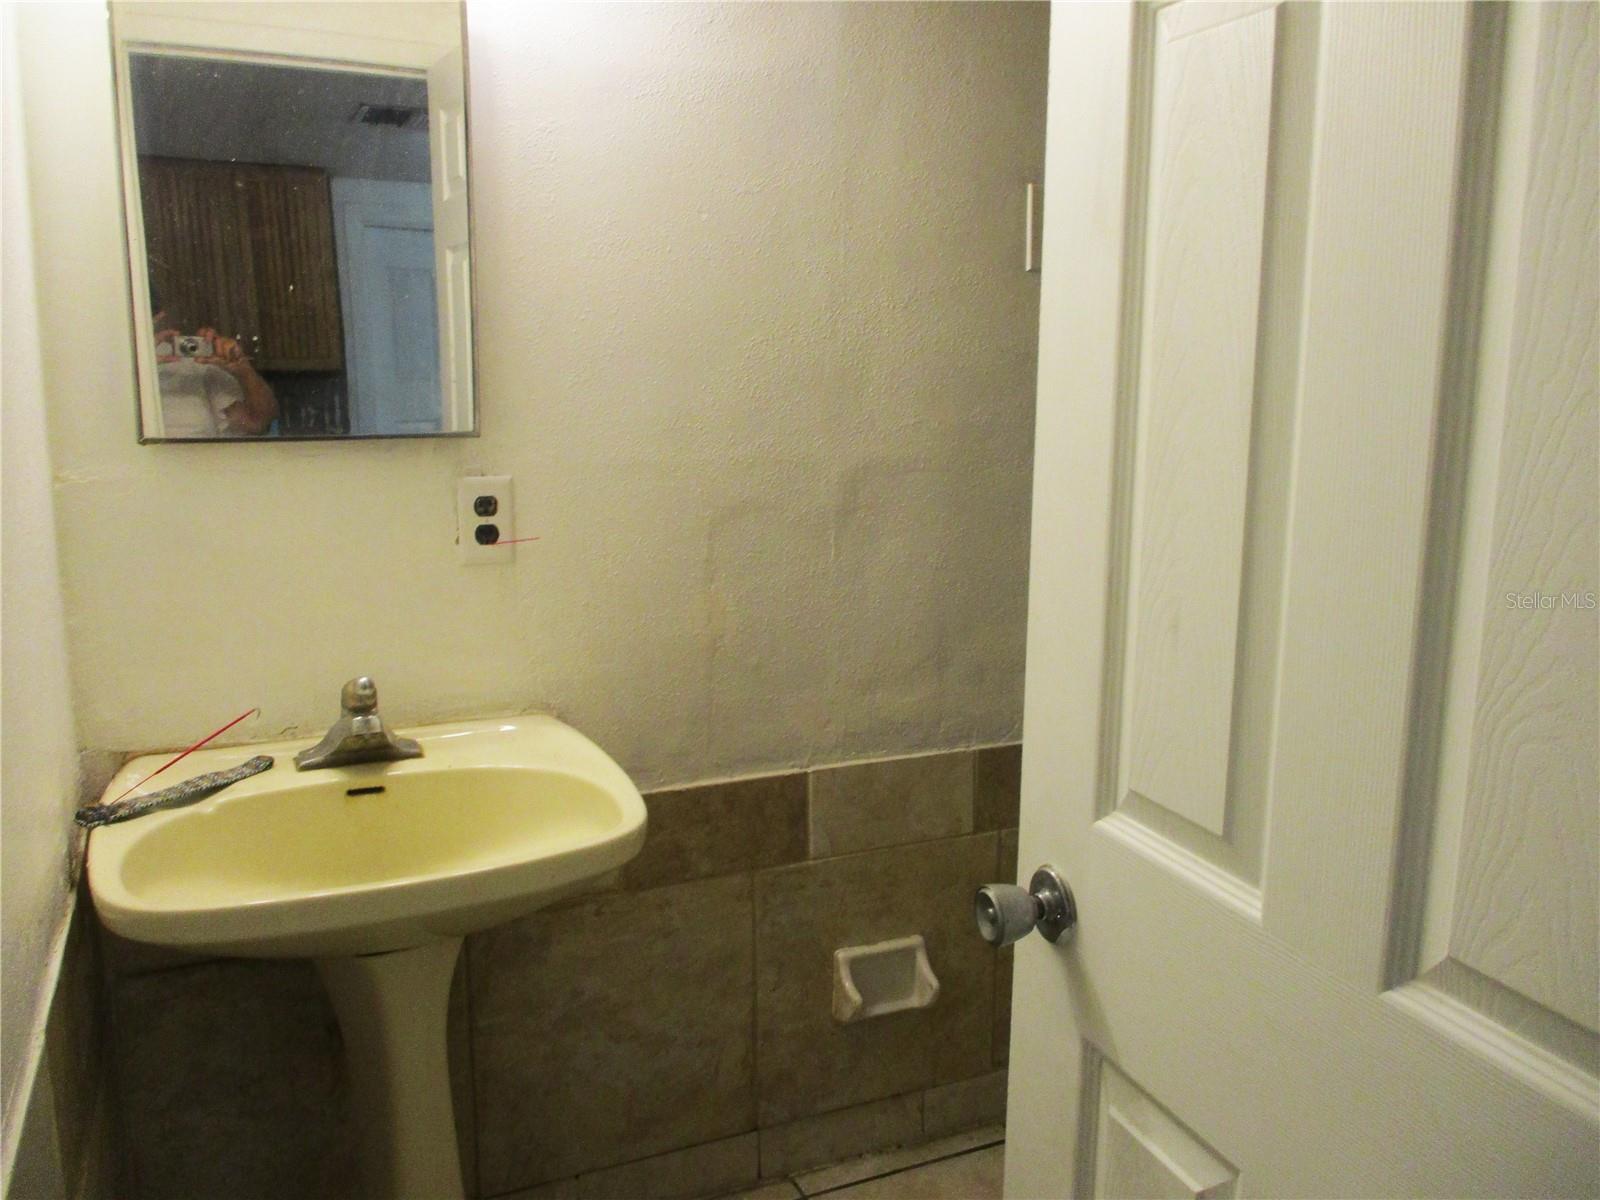 2nd Bathroom with stall shower